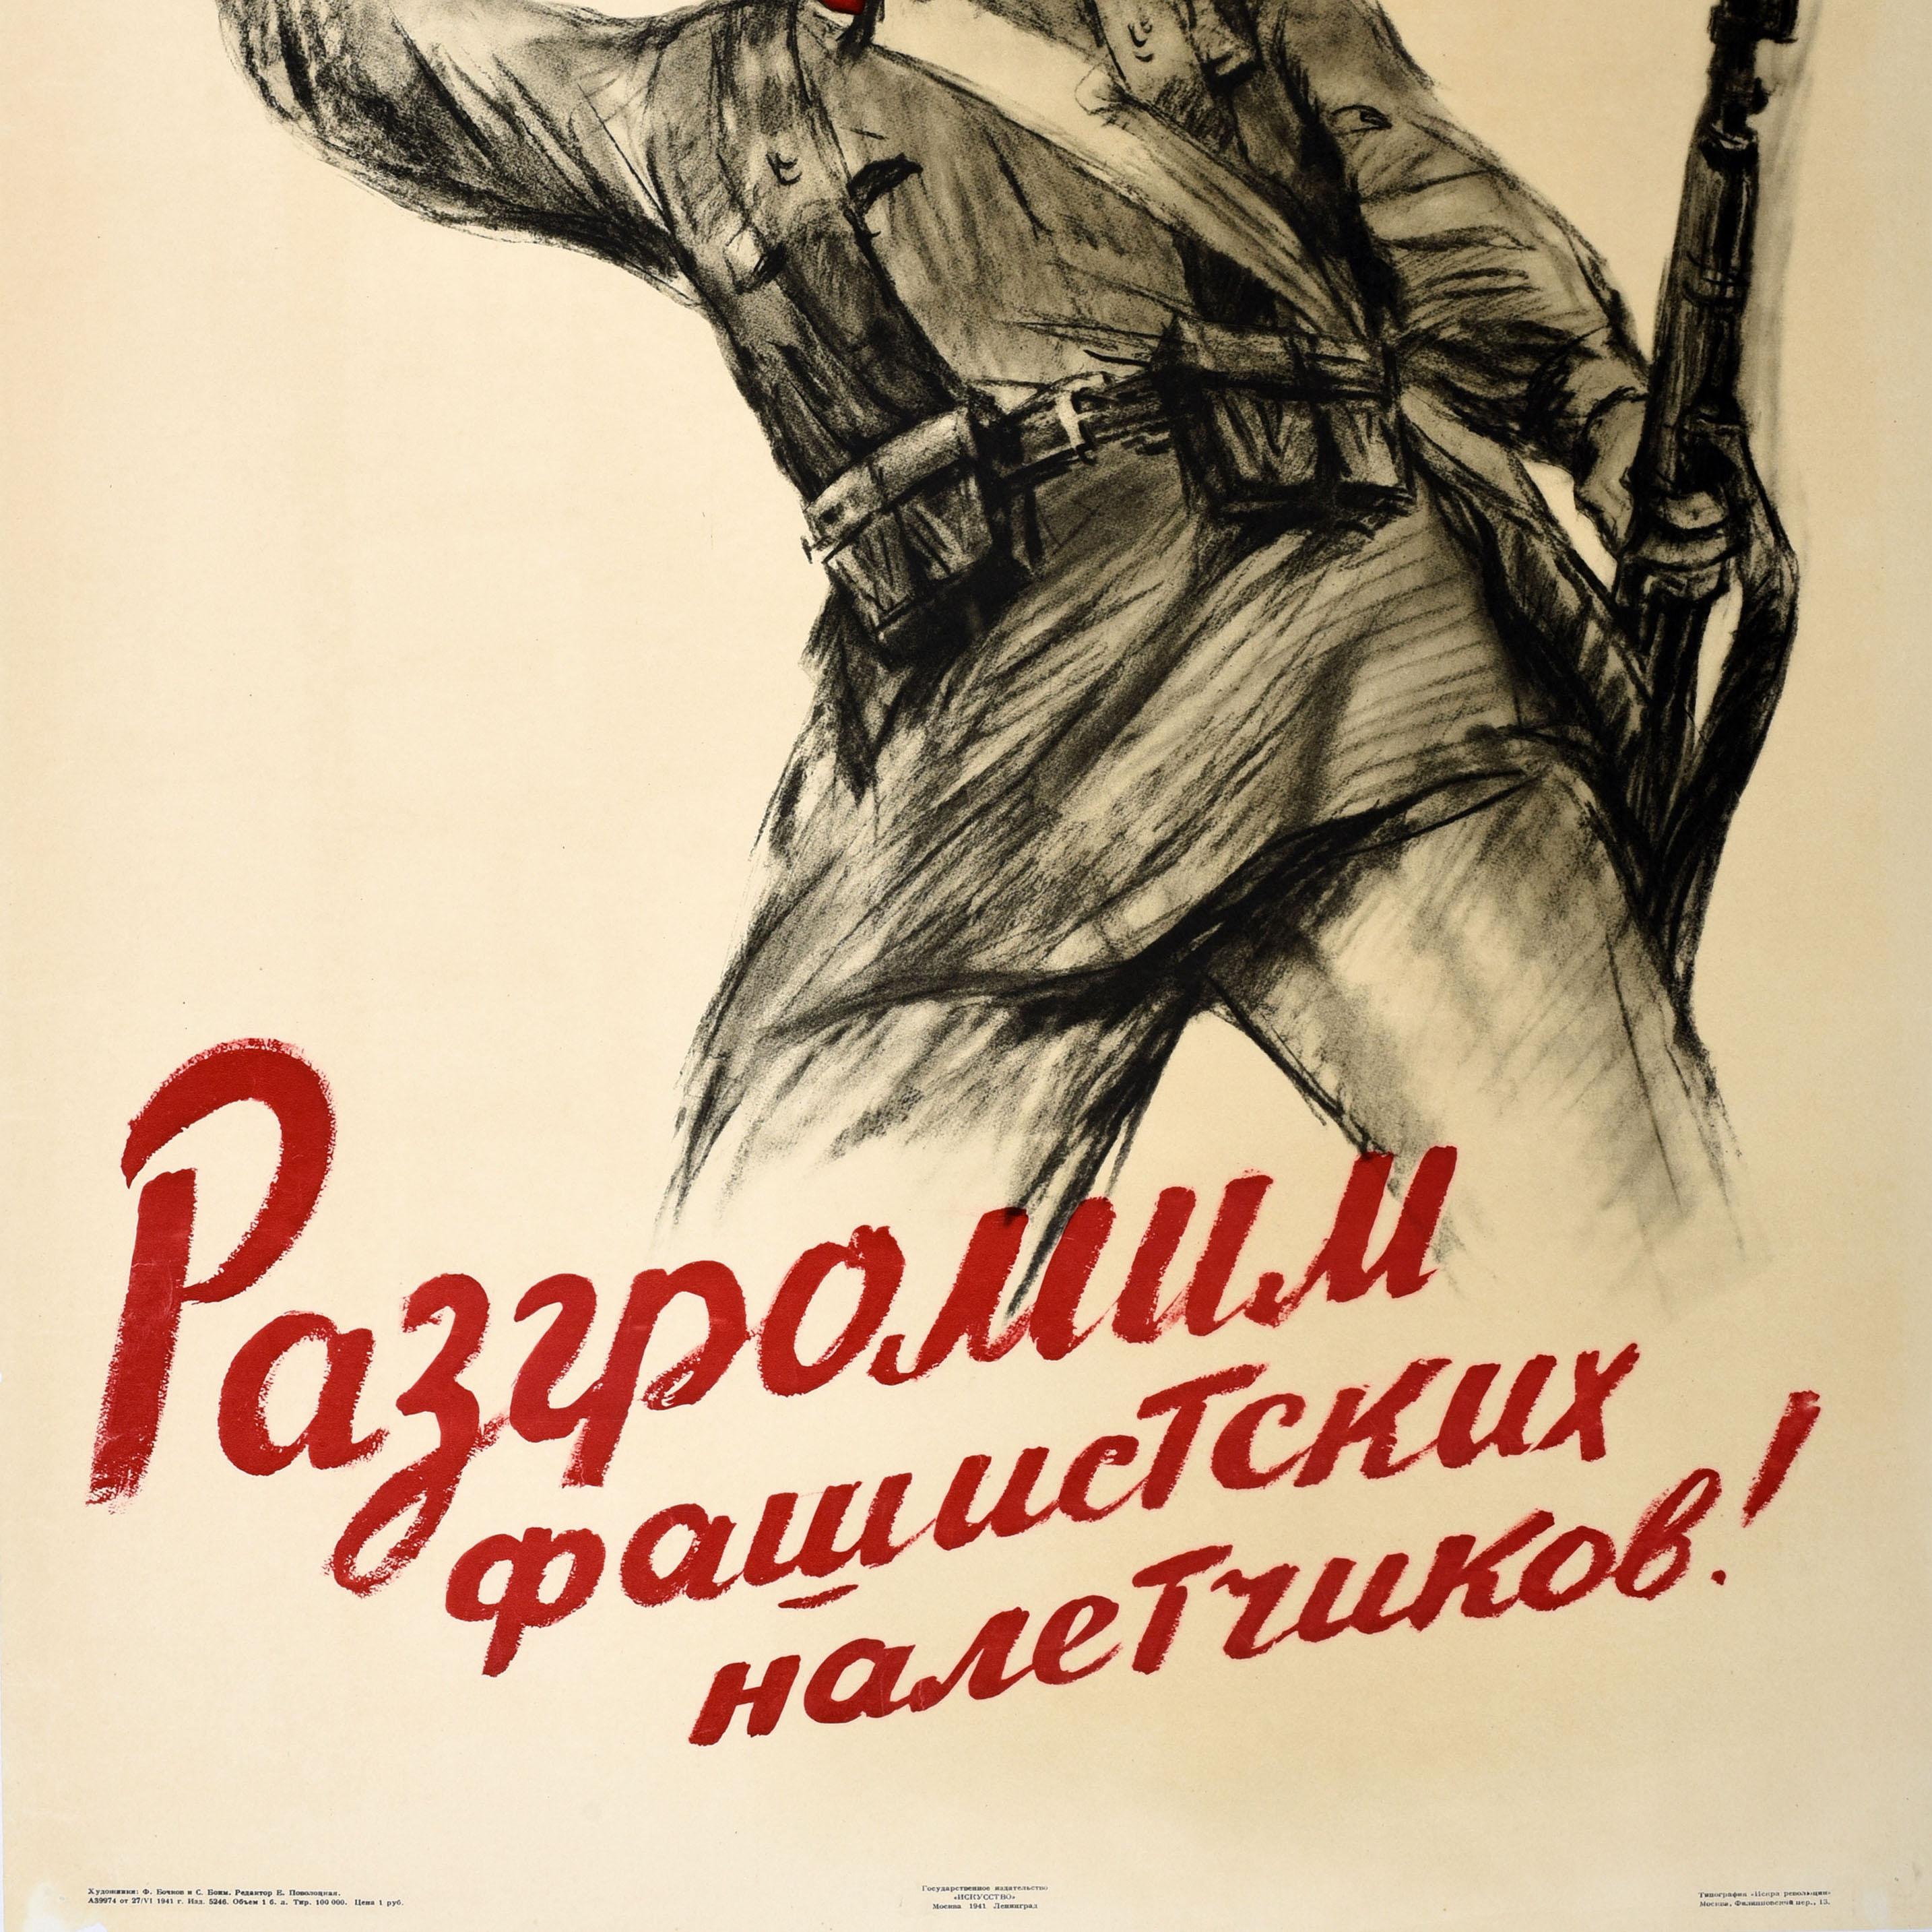 Rare original vintage World War Two propaganda poster issued in the Soviet Union - Defeat the Fascist Raiders / Разгромит фашистских налетчиков! - featuring dynamic black and white artwork depicting a Red Army soldier holding a bayonet rifle gun in